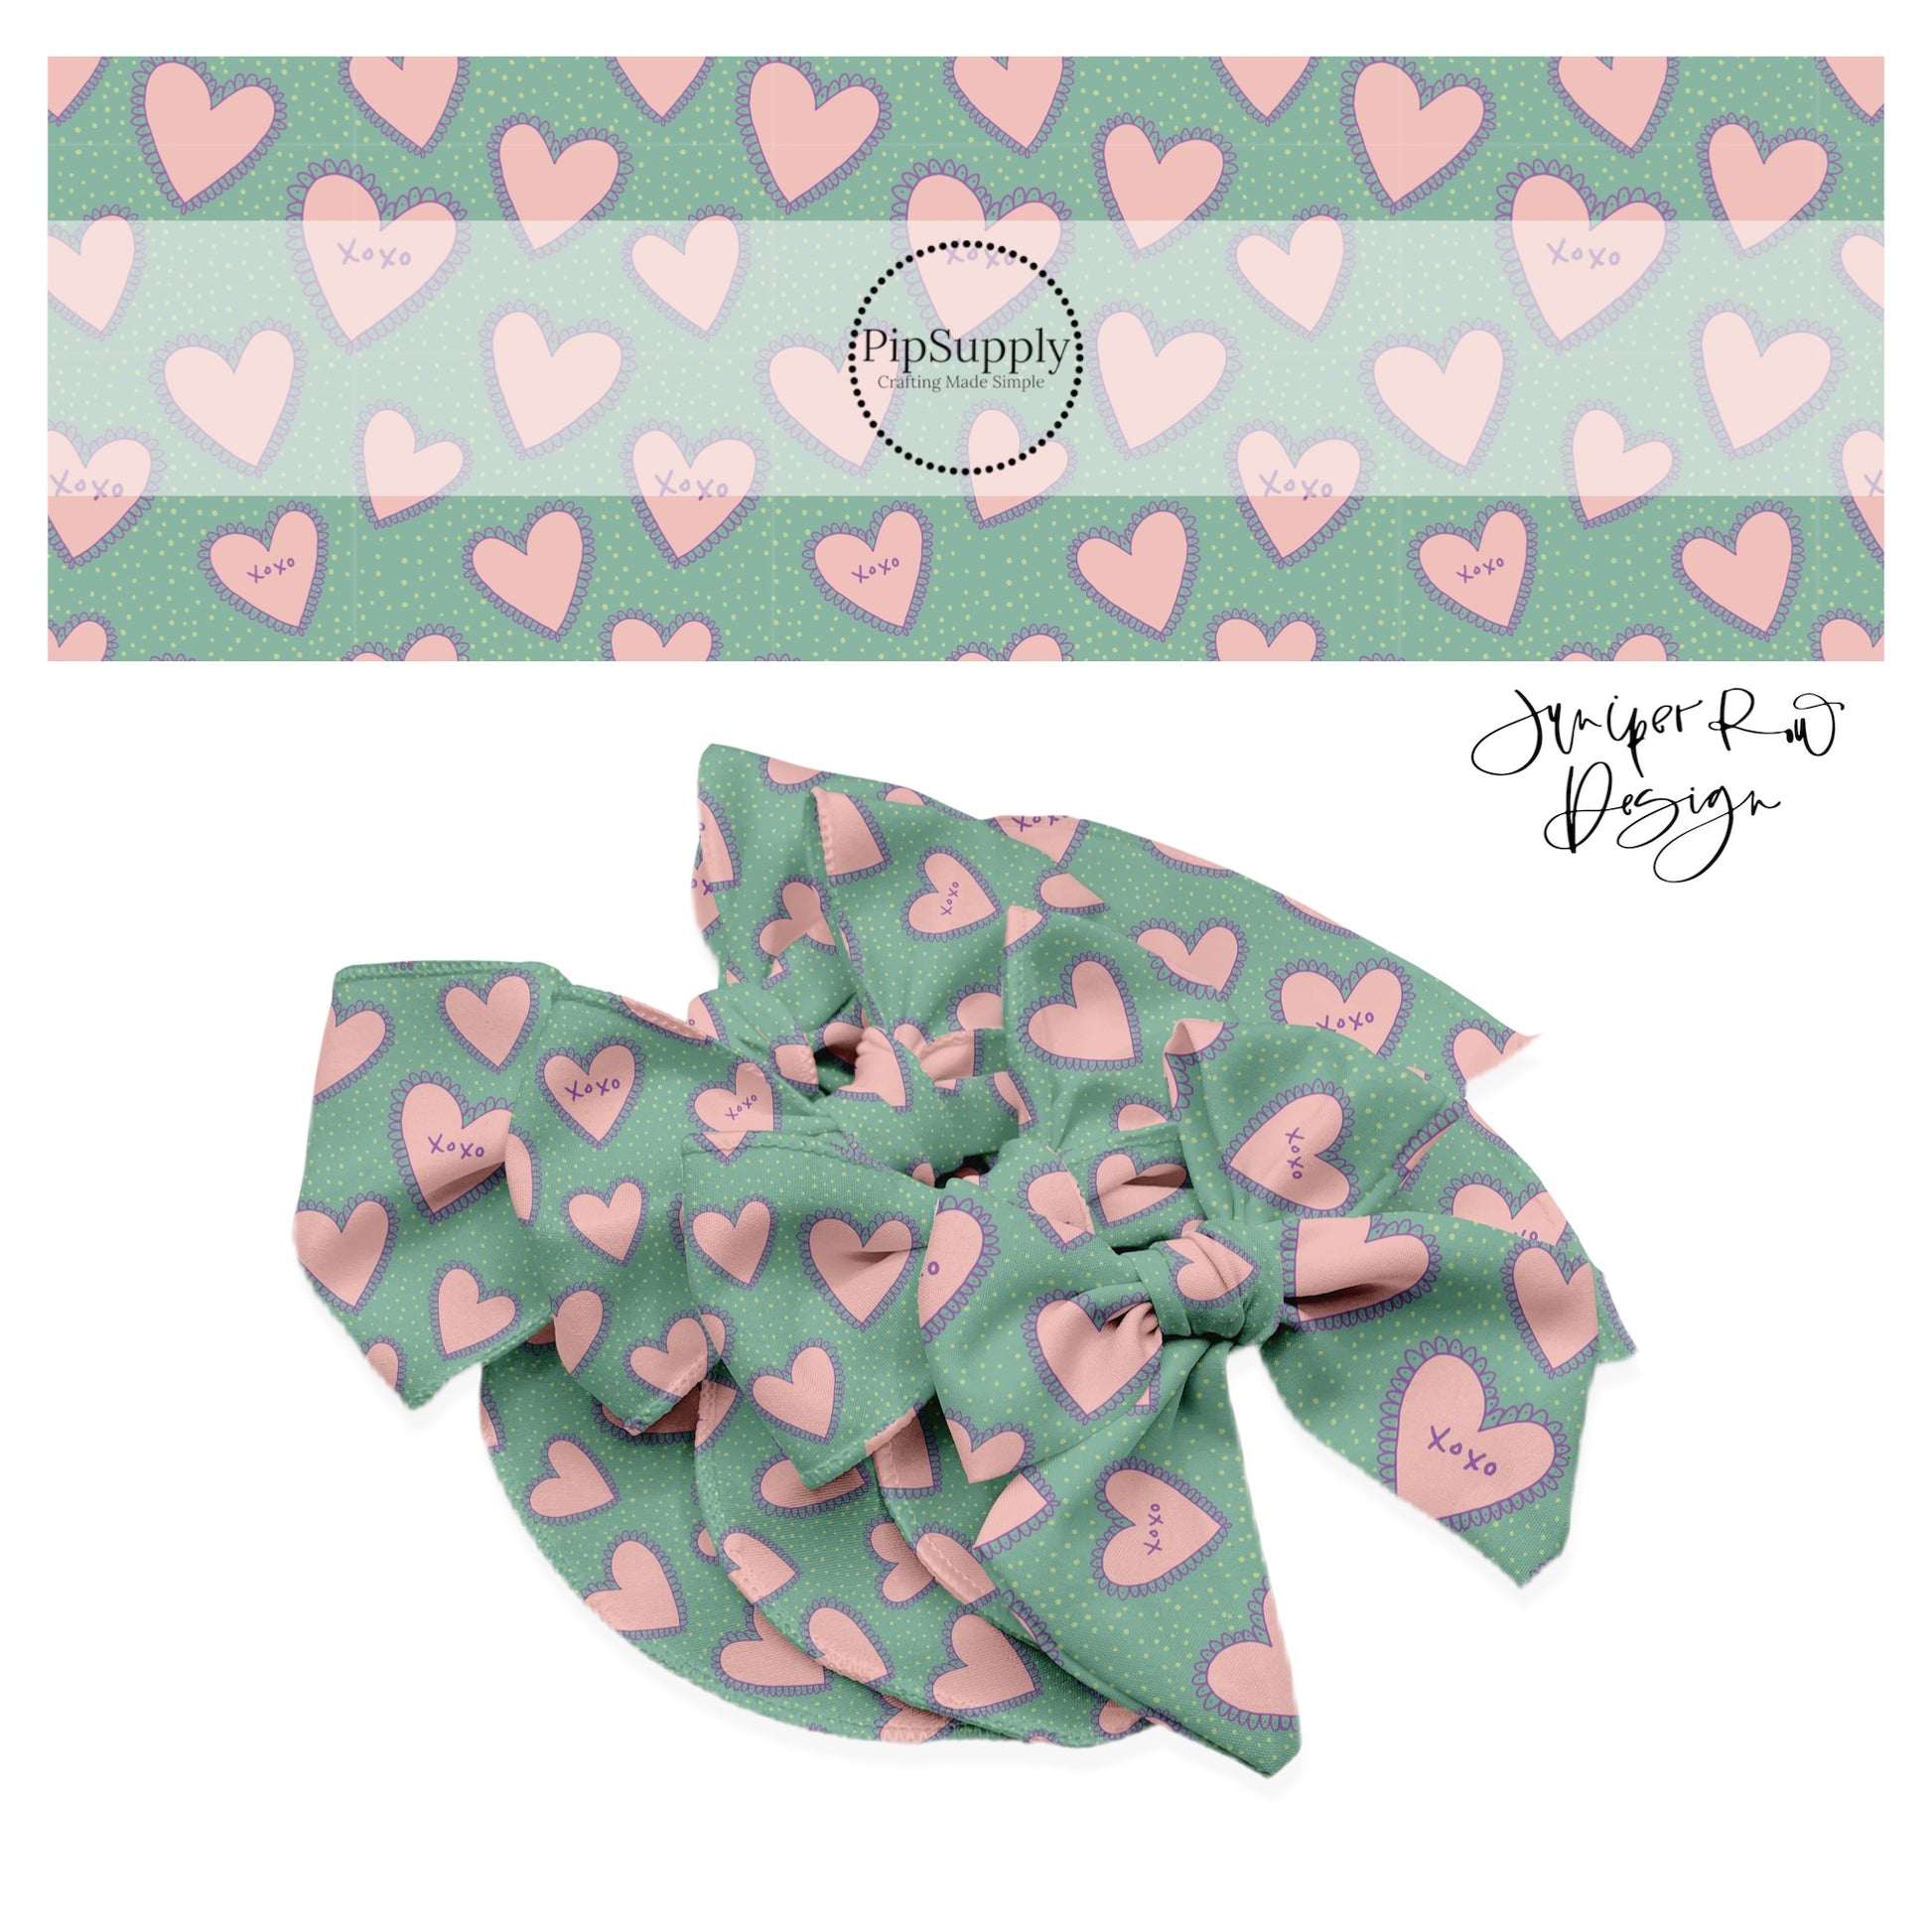 Seafoam with white polka dots and pink hearts on bow strips